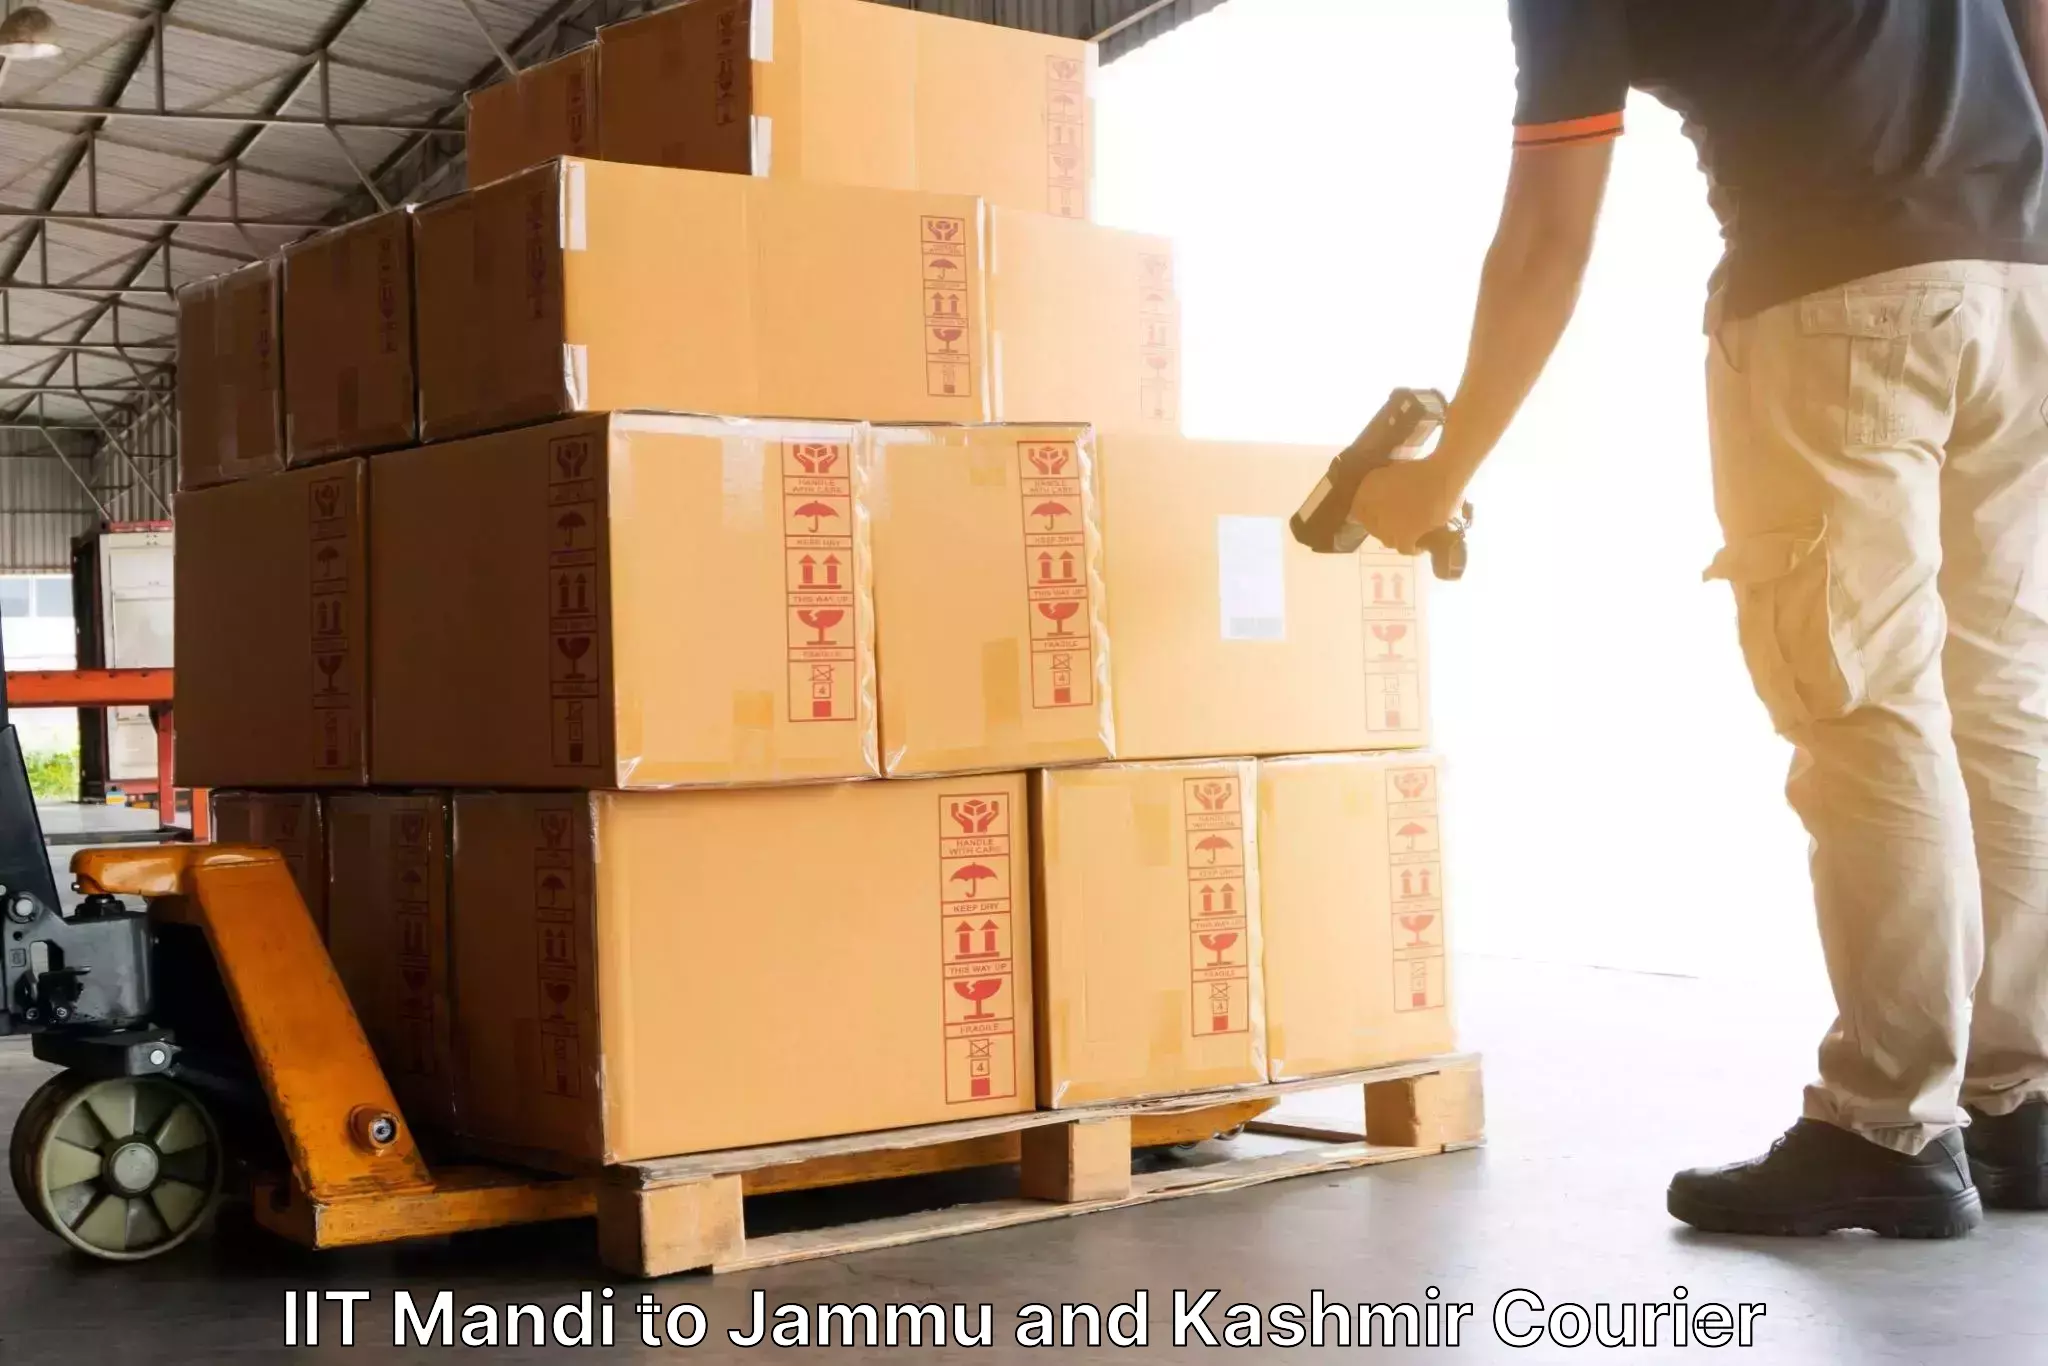 Full-service courier options IIT Mandi to Anantnag